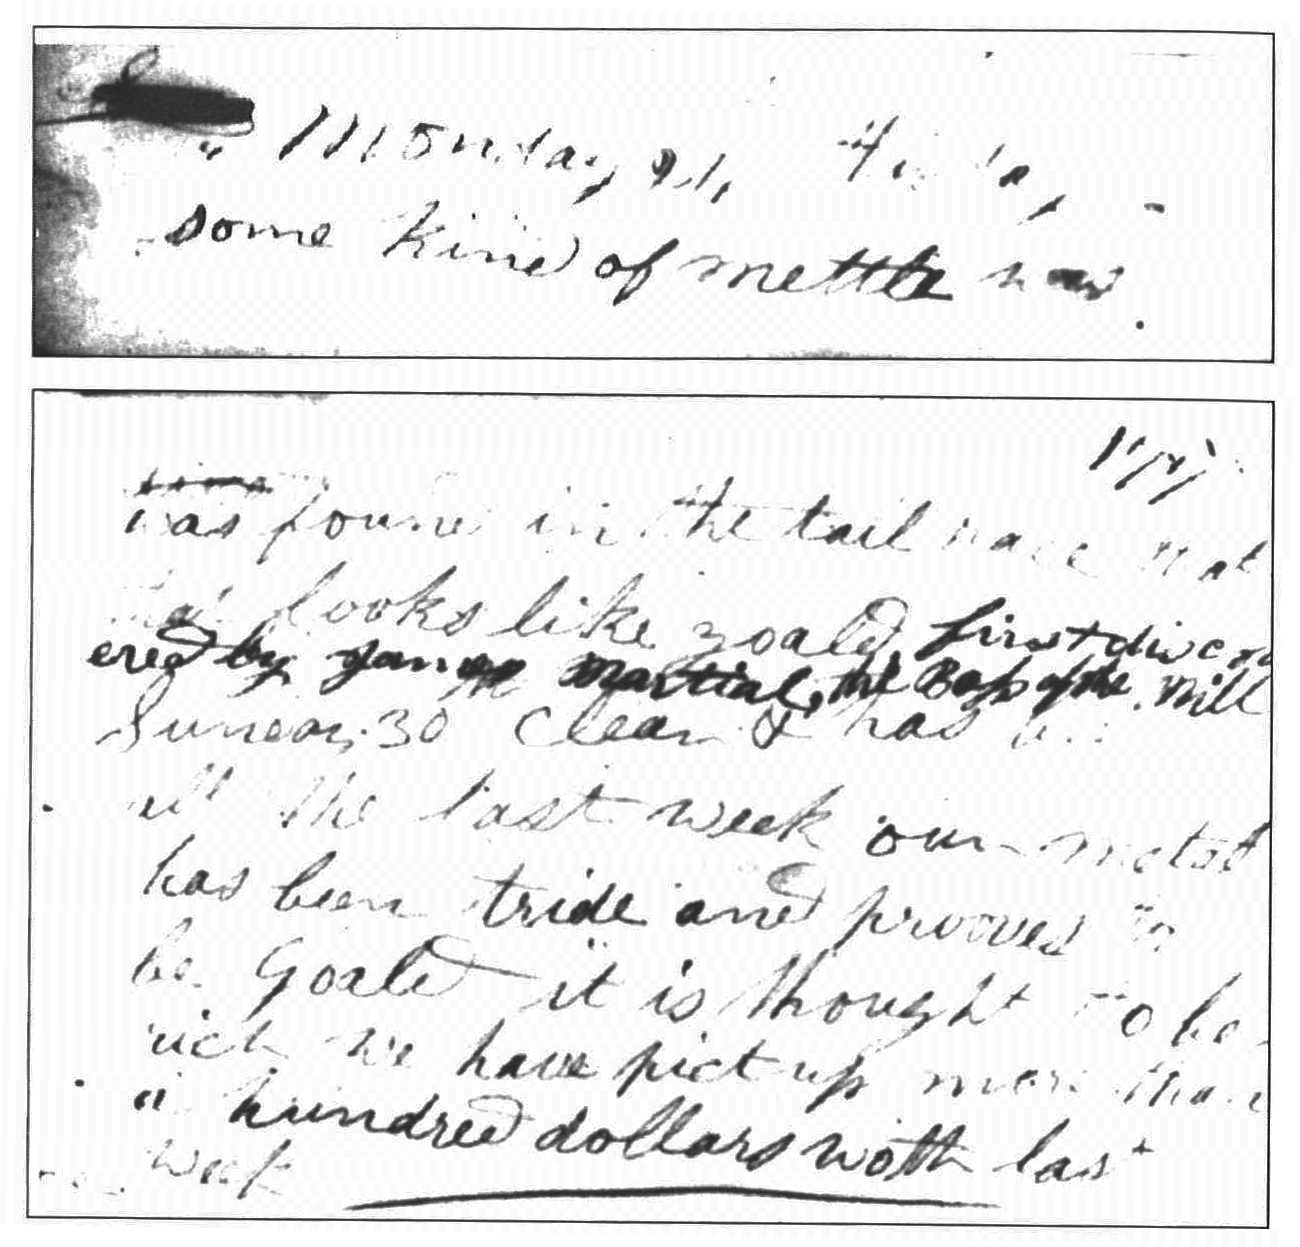 Pages from Henry Bigler's journal, showing date of gold discovery